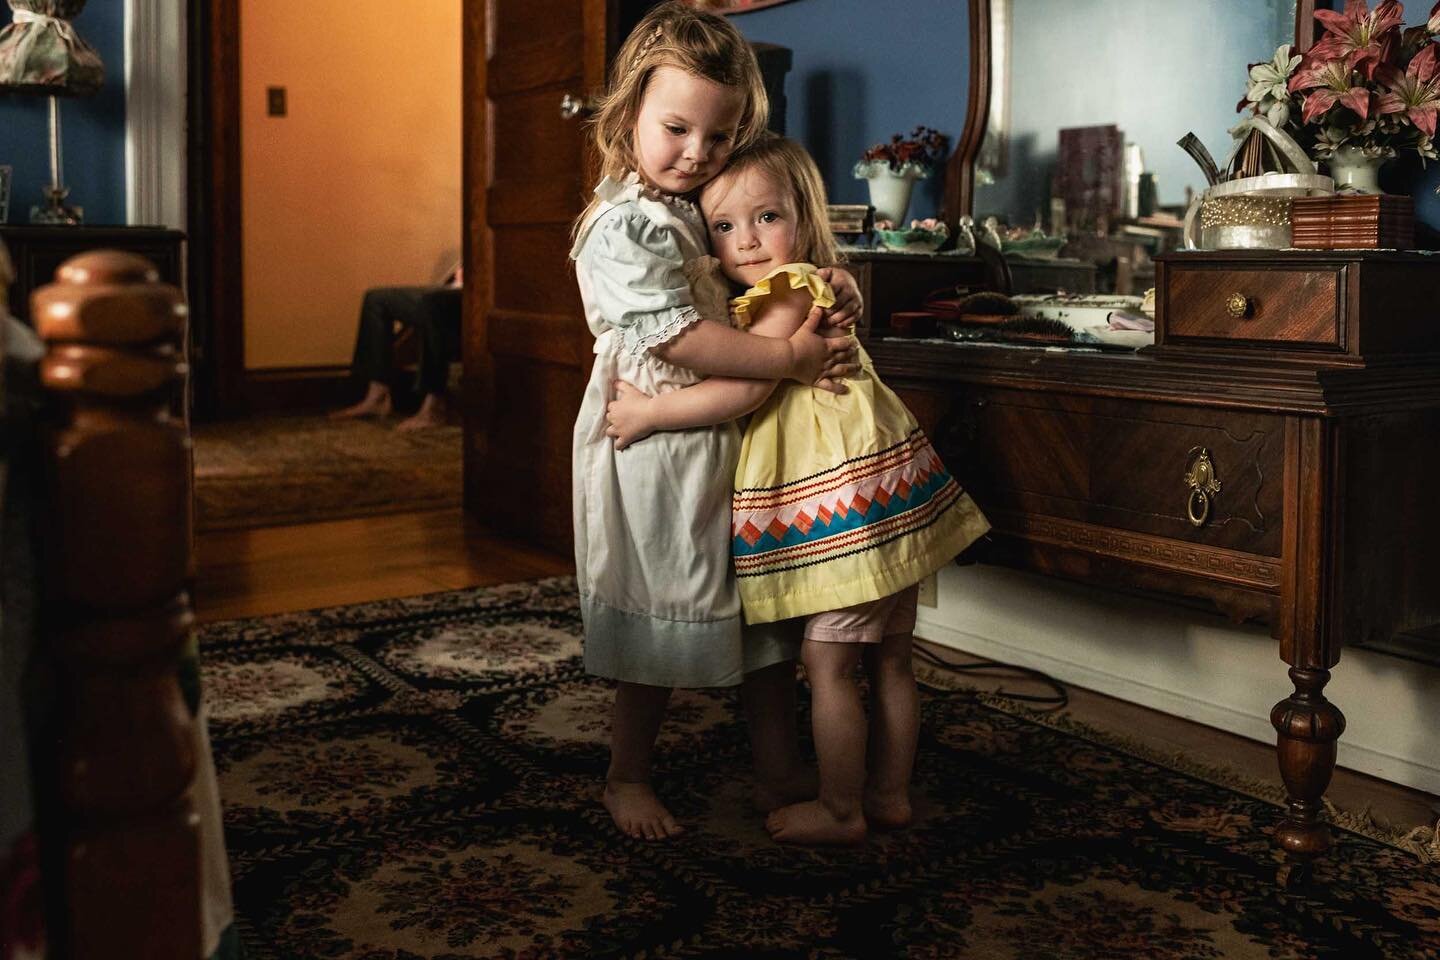 Sisterly love during a recent three generation family lifestyle session. To see more from this beautiful session just click the link in my profile to go to the blog!🧡📸

#realdanielle #daniellegardner #daniellegardnerphotography